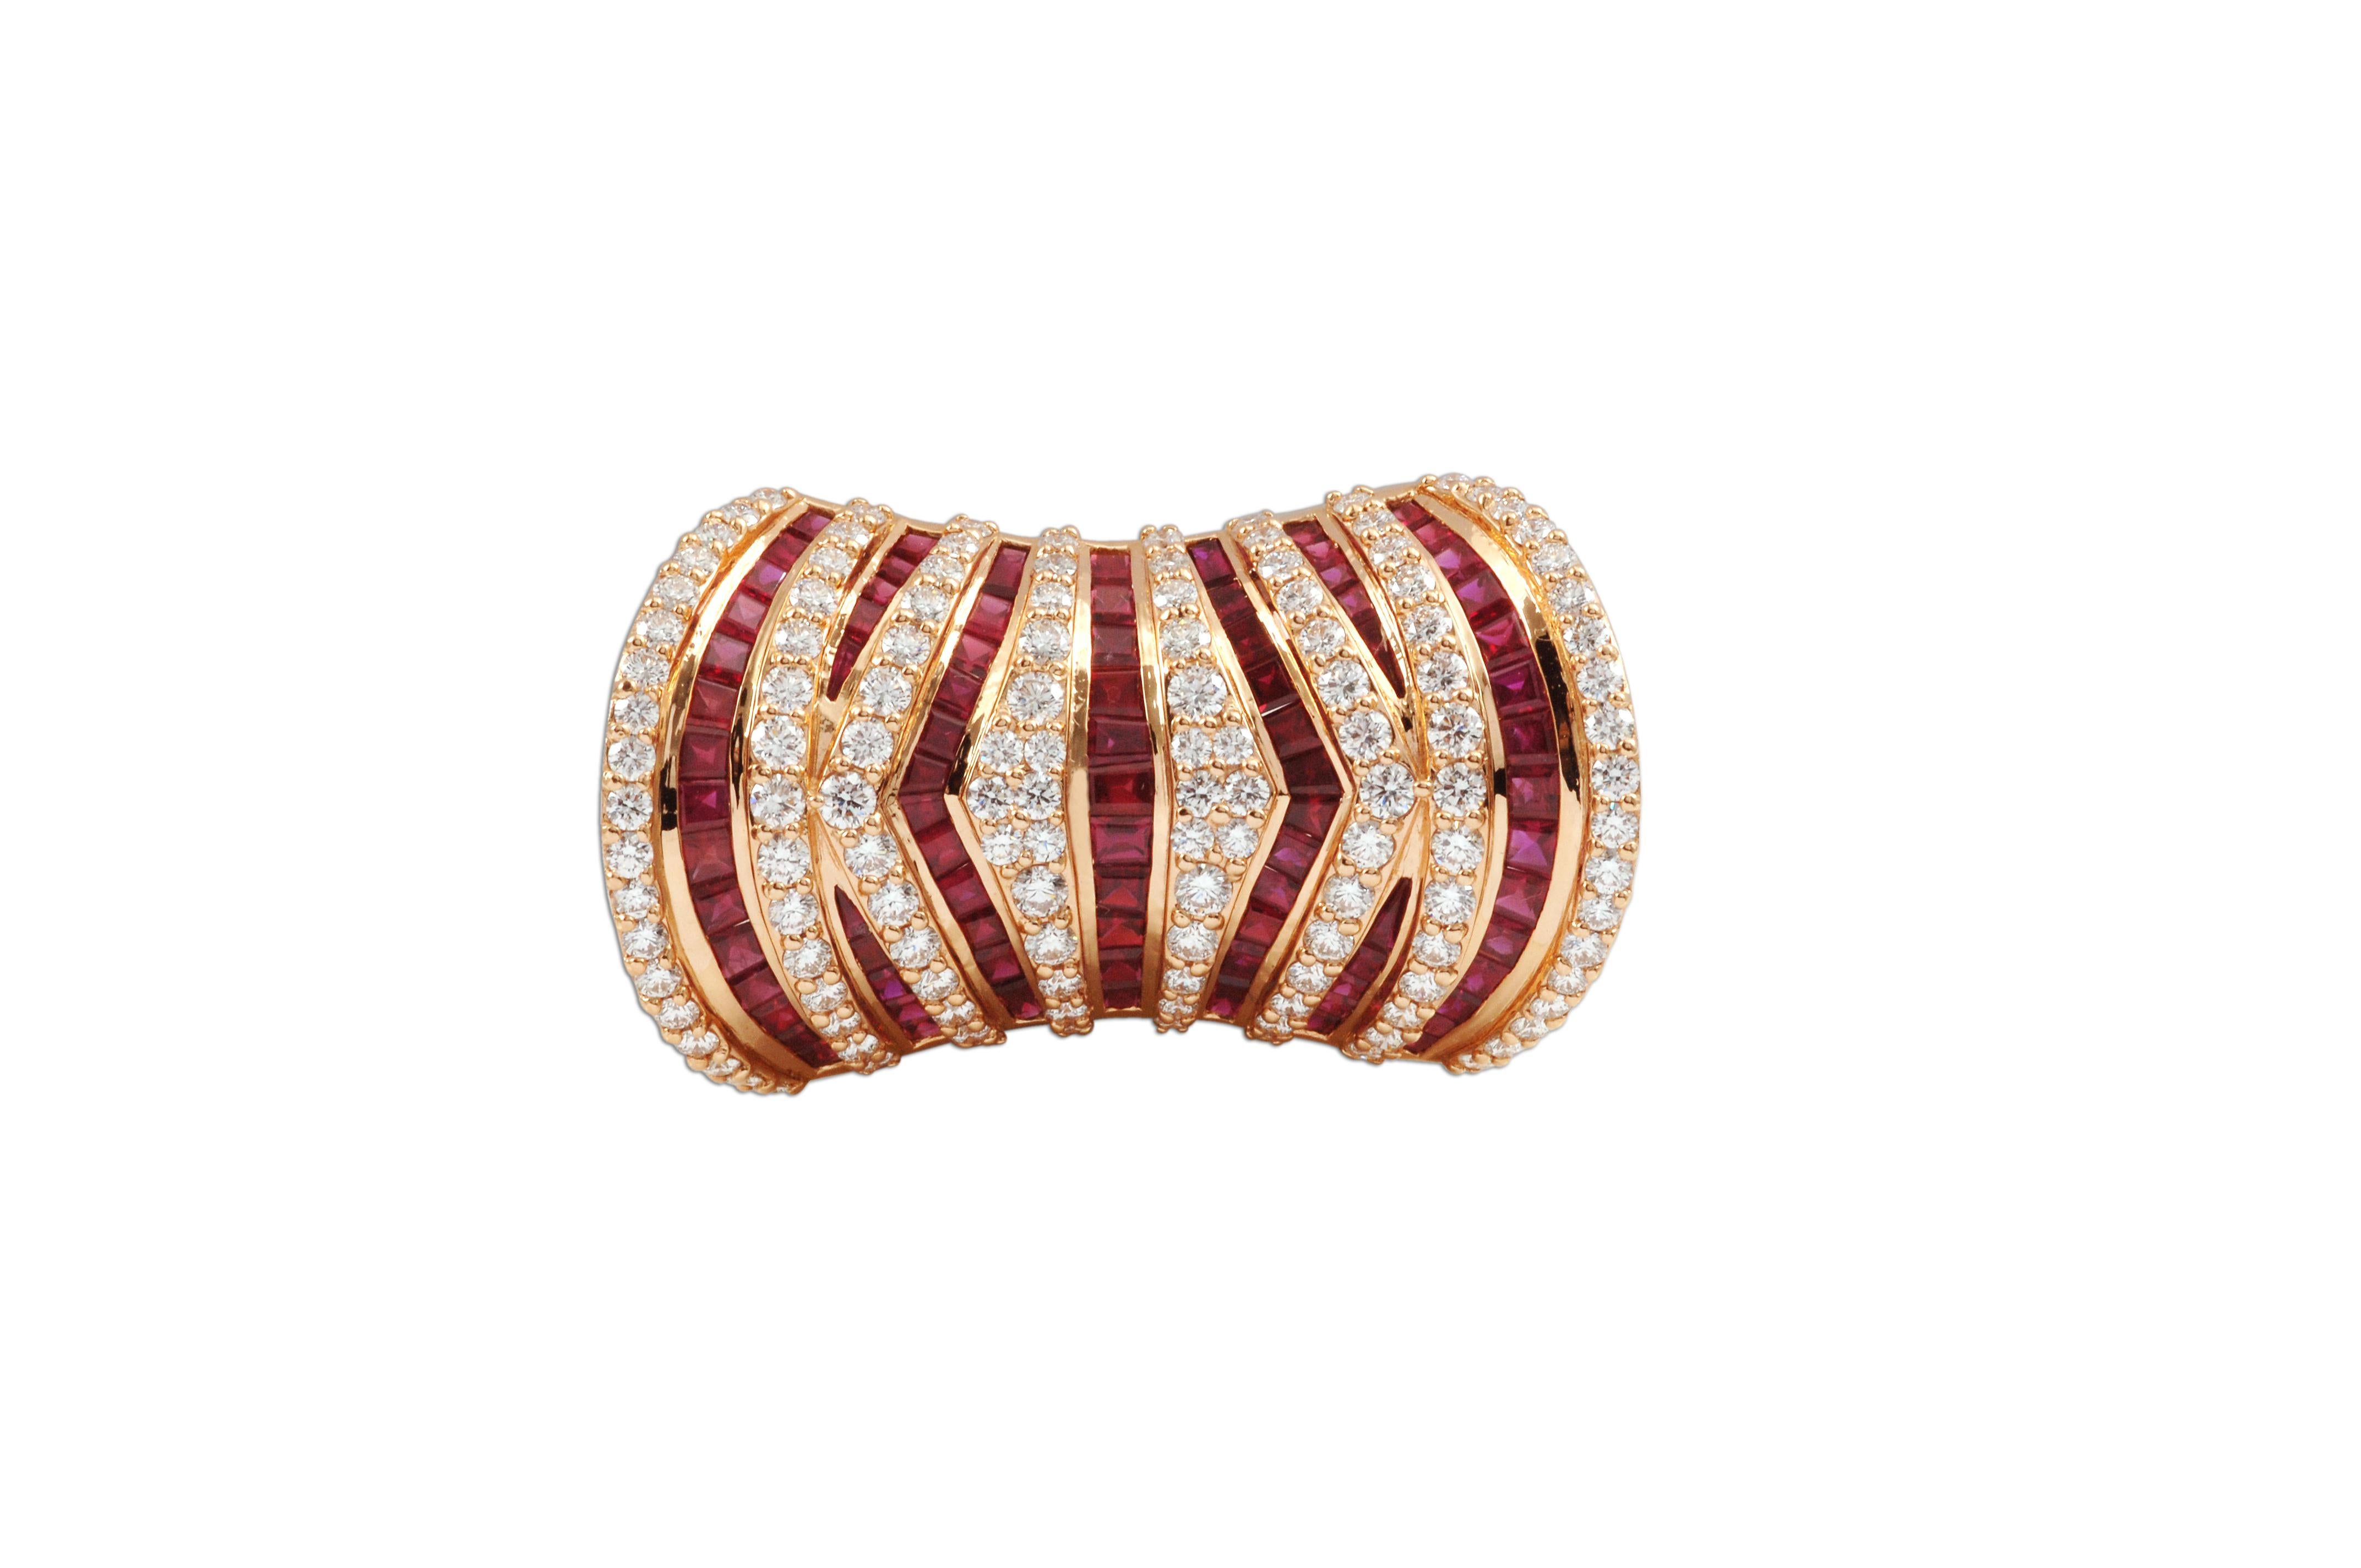 Ruby 6.70 carats with Diamond 3.07 carats Ring Set in 18 Karat Pink Gold Settings


Width: 2.3 cm
Length: 4.0 cm 
Ring Size: 57
Weight: 10.09 grams

